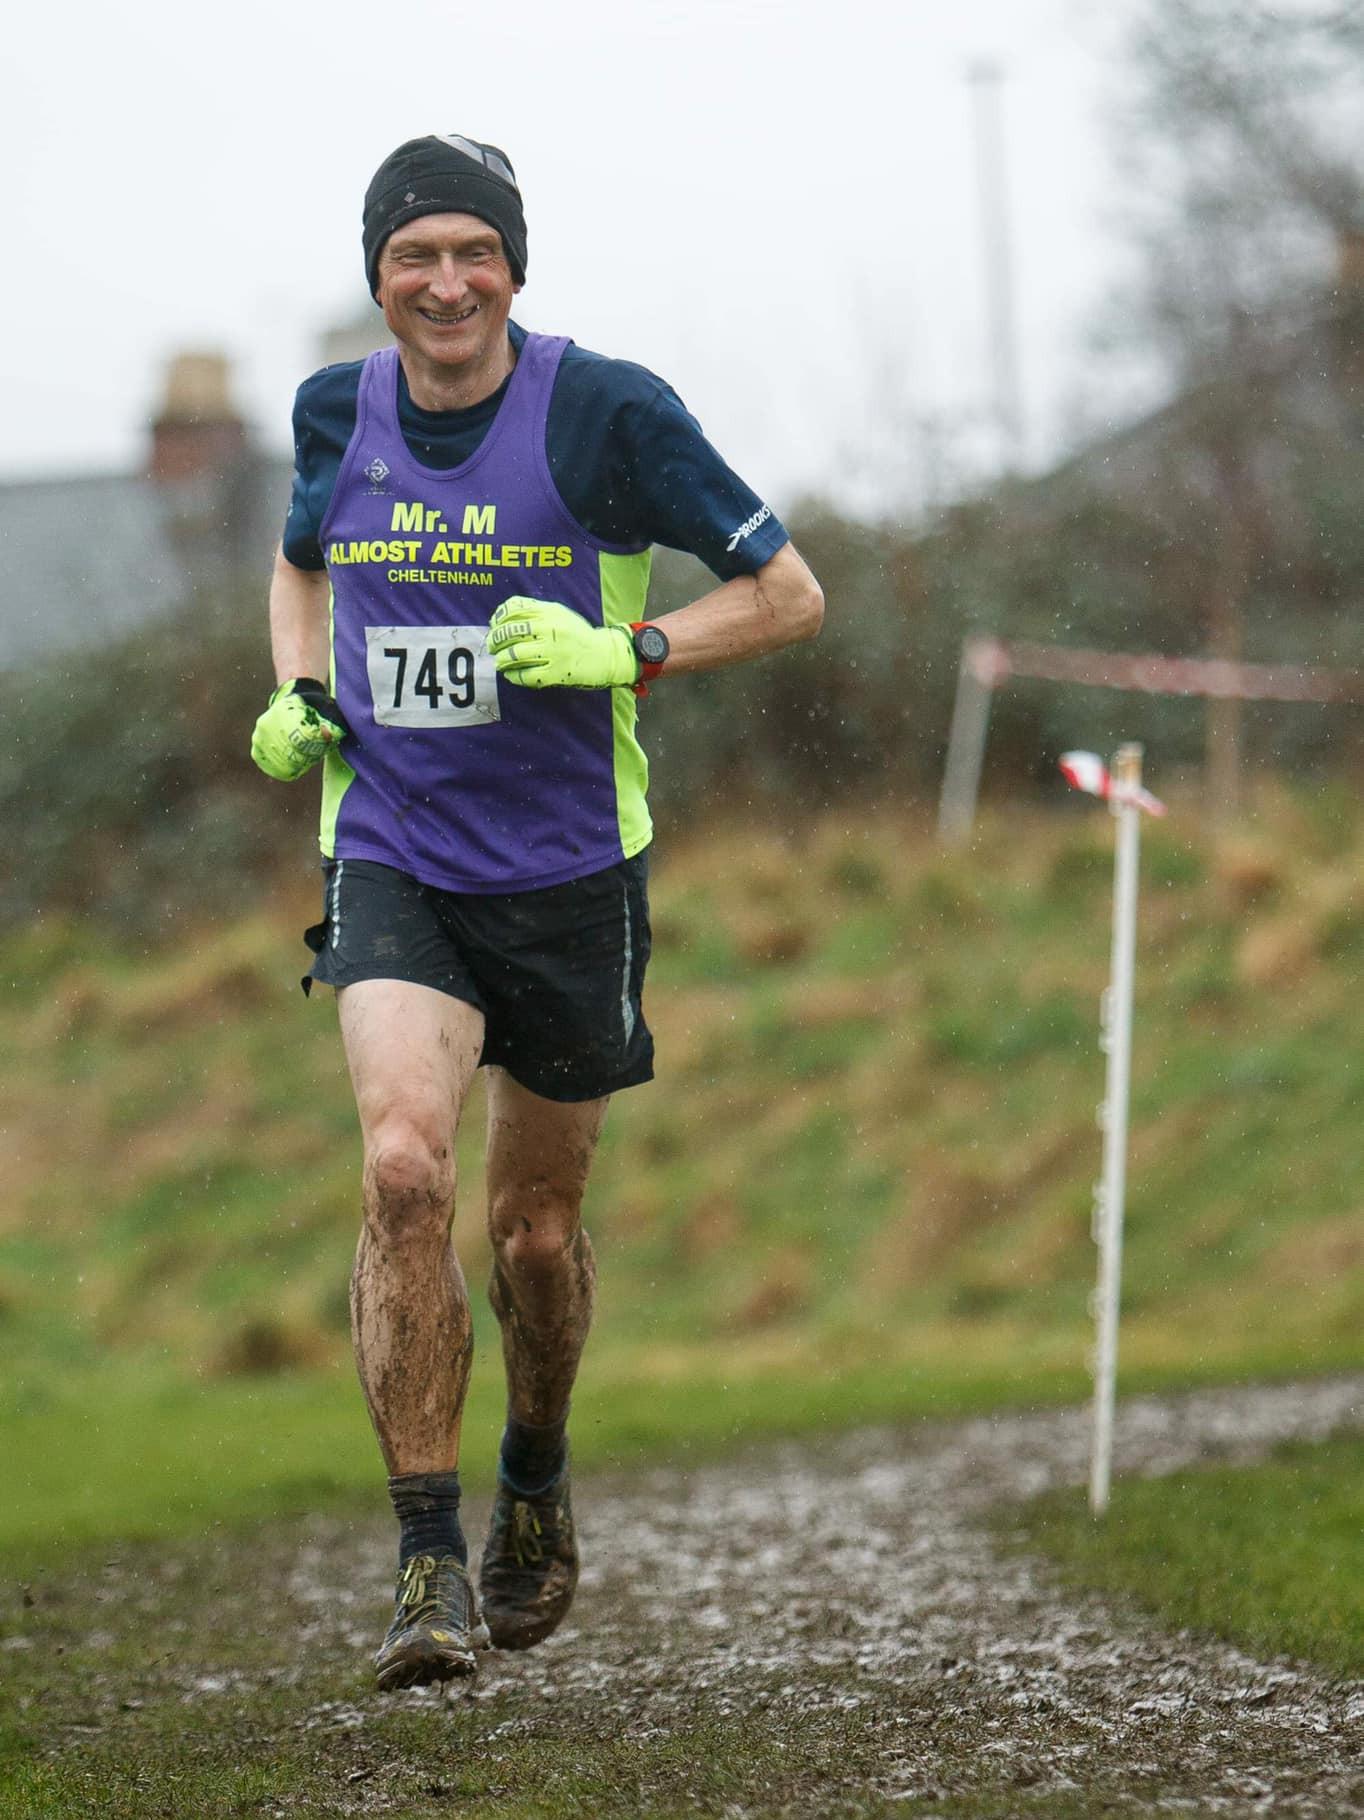 Dave McGrath - Runner of the Month, February 2022